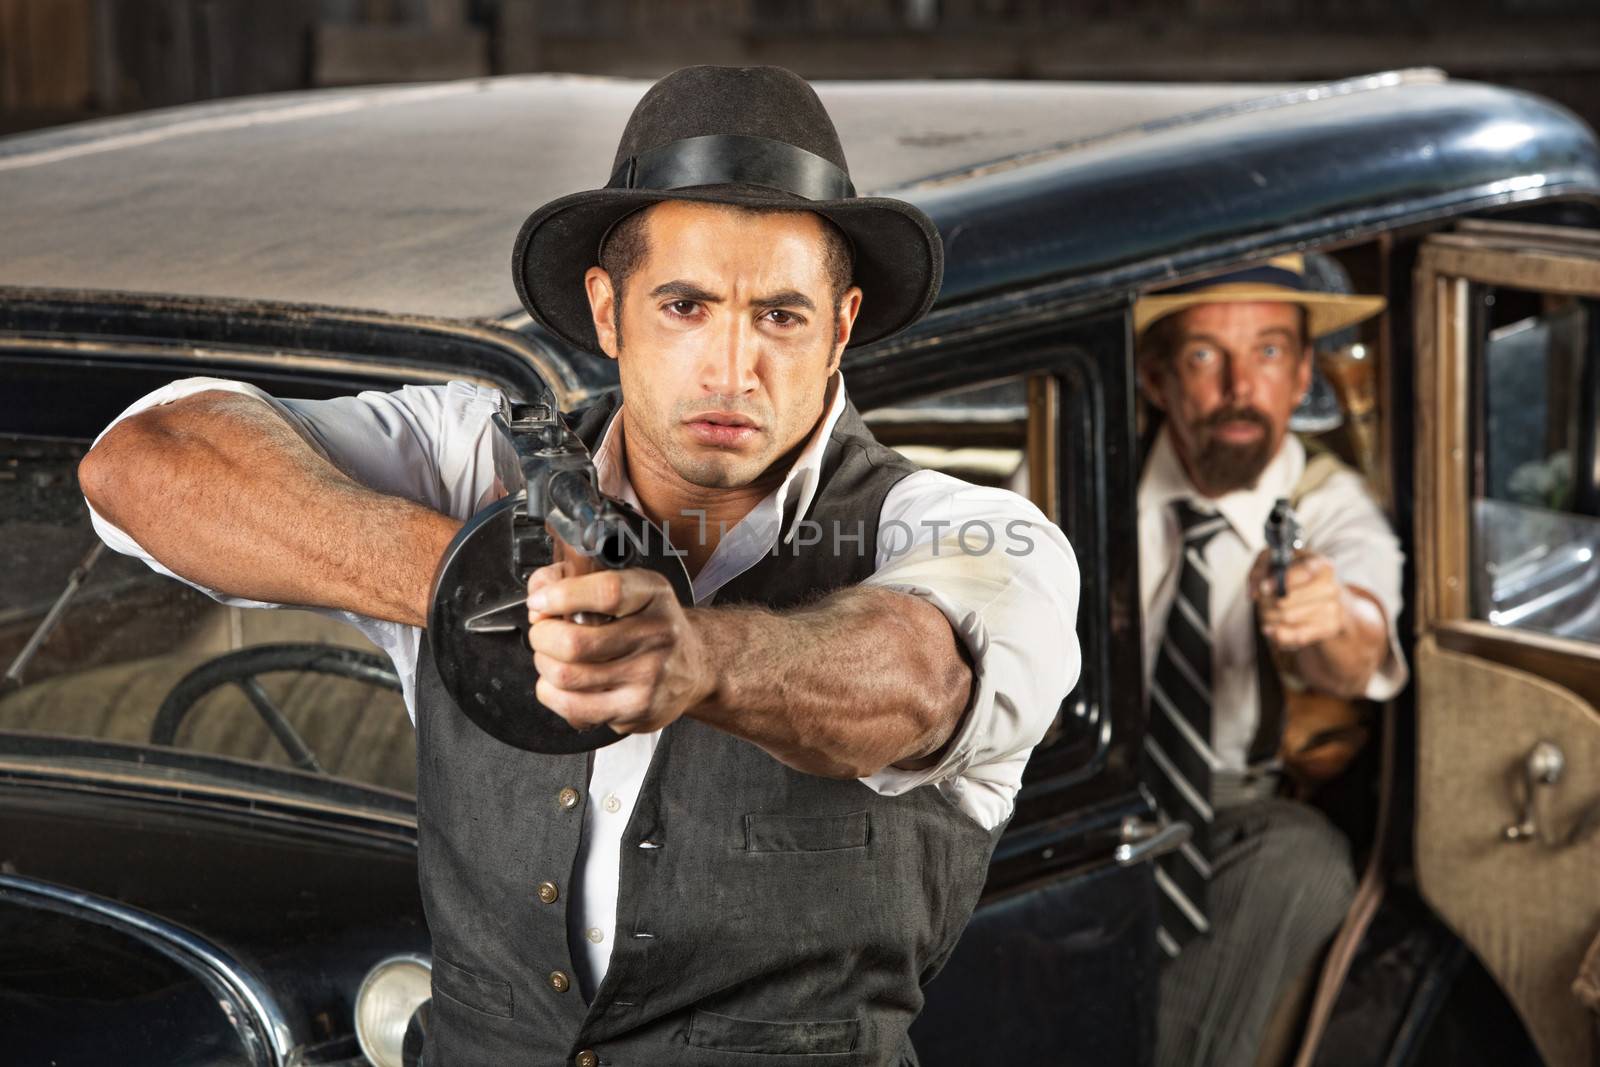 Tough 1920s Era Gangsters with Weapons by Creatista